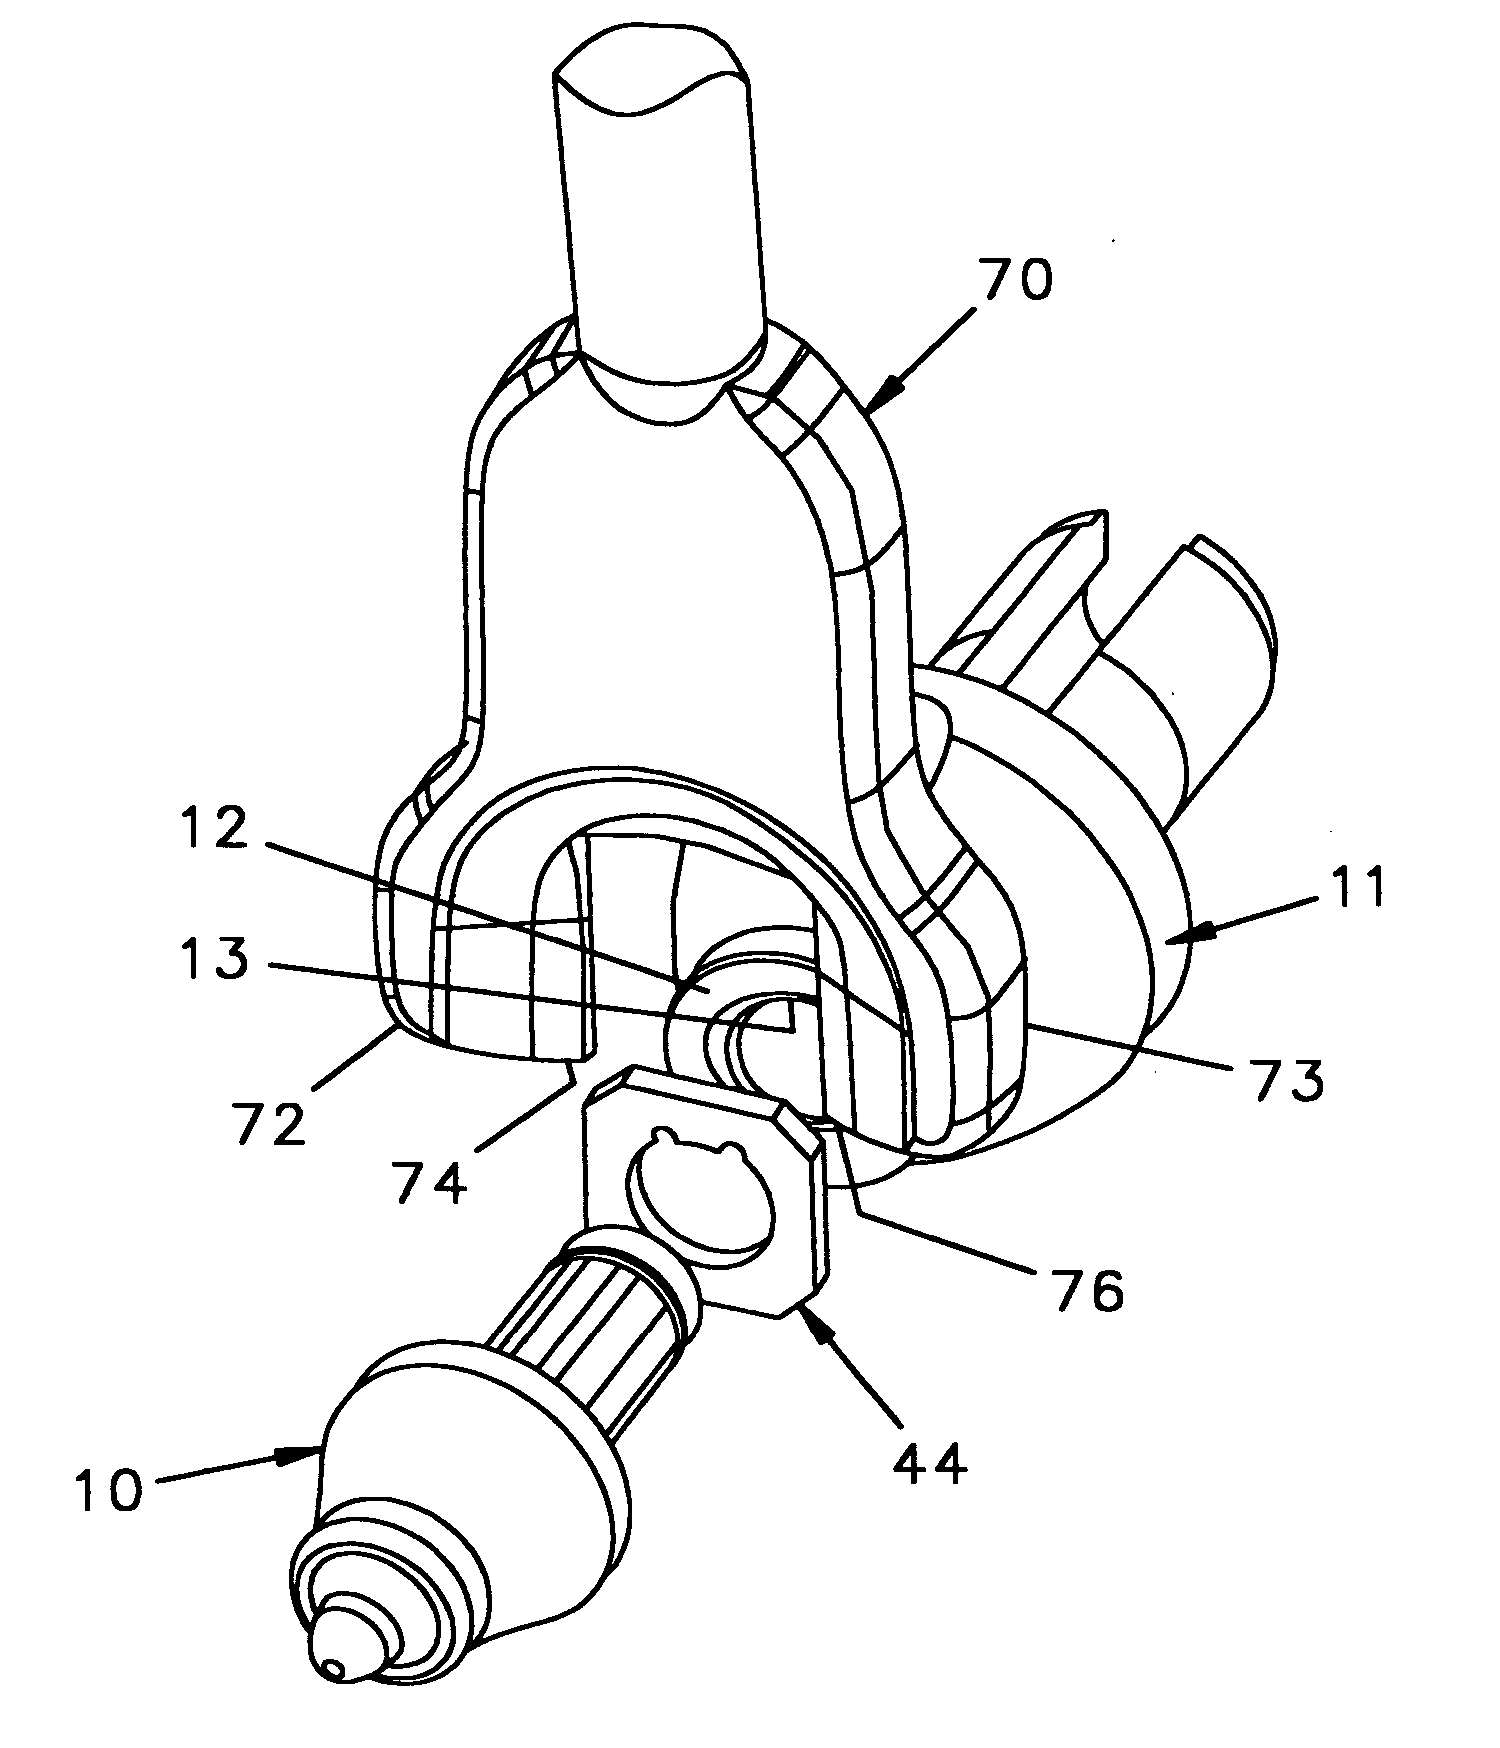 Extraction device and wear ring for a rotatable tool